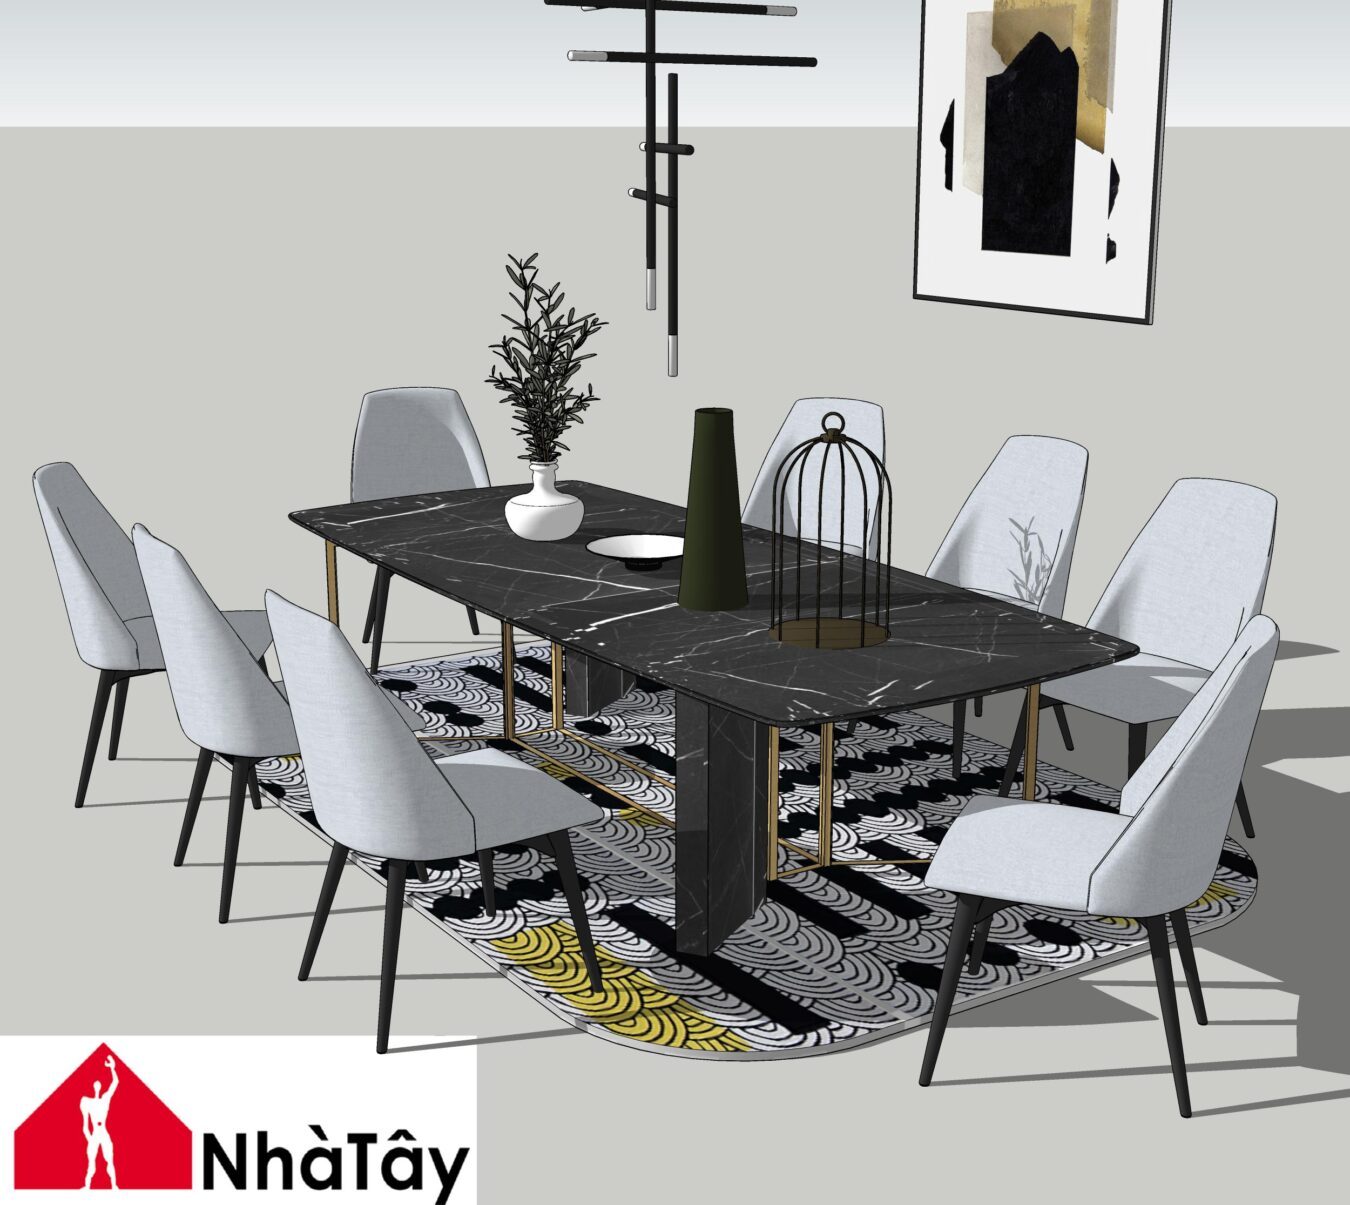 4833 Dining Table And Chair Sketchup, Kitchen & Dining Room Tables